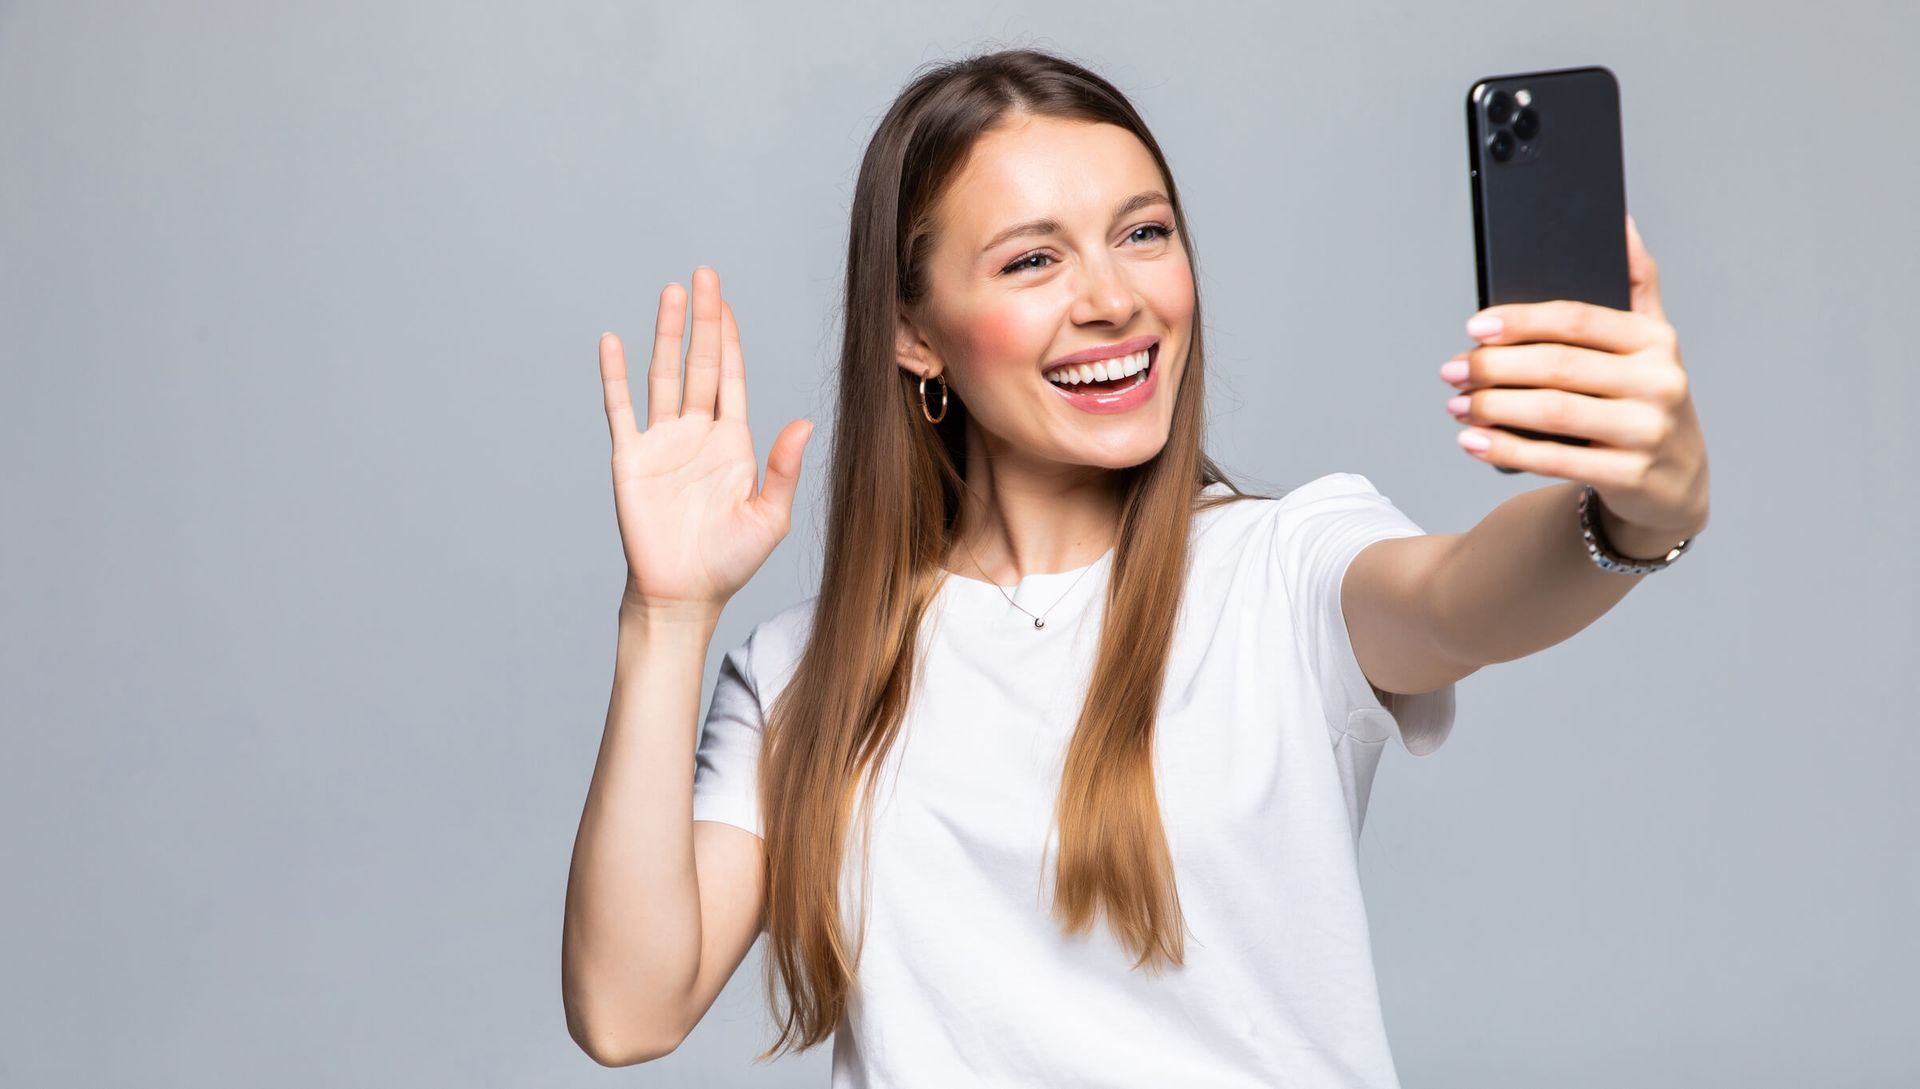 A woman waving on a phone while recording herself